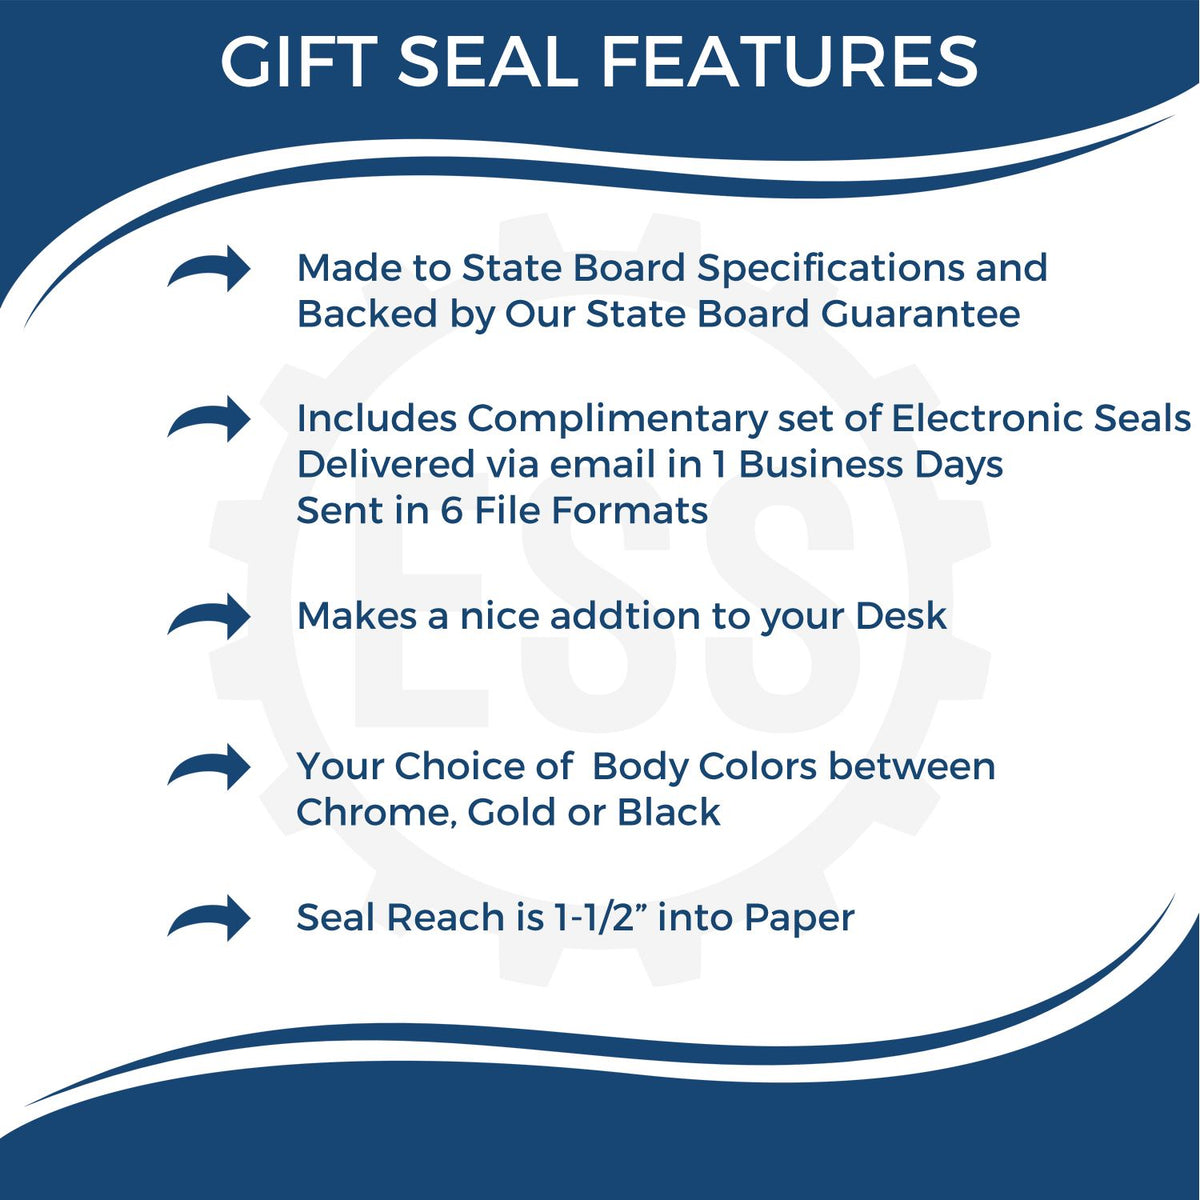 A picture of an infographic highlighting the selling points for the Gift Alaska Geologist Seal